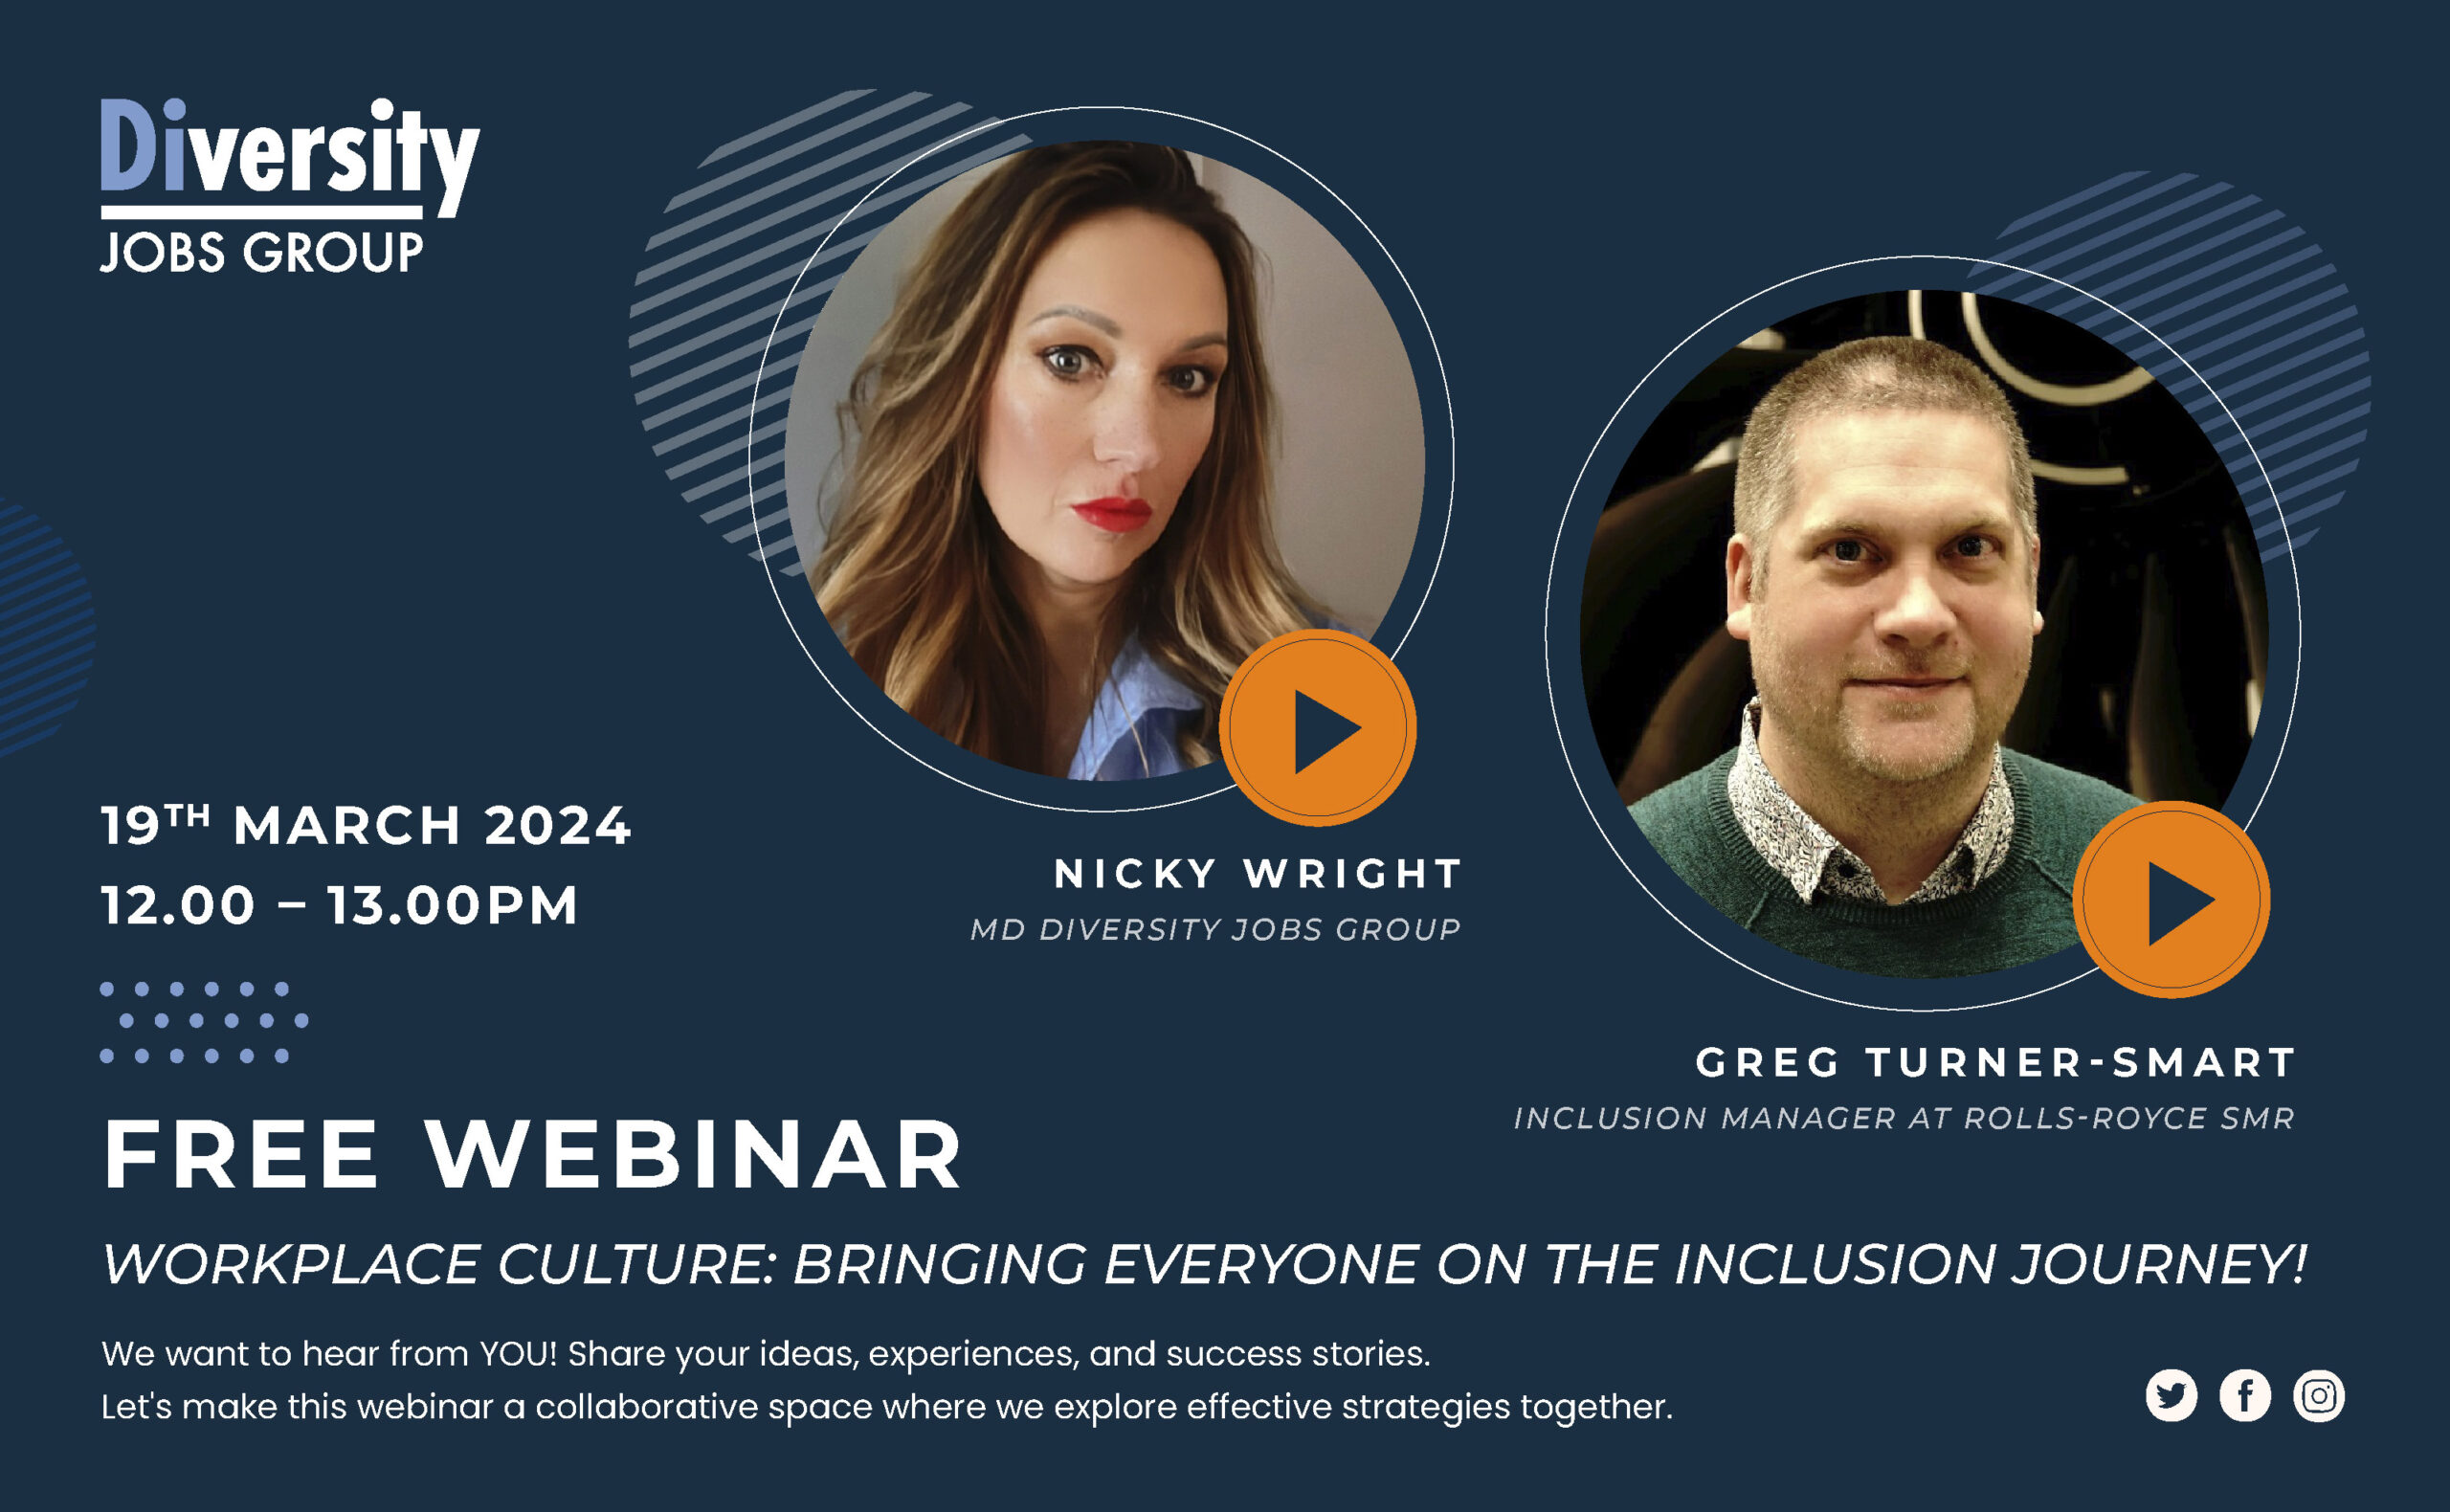 FREE Webinar: Workplace Culture: Bringing Everyone on the Inclusion Journey!